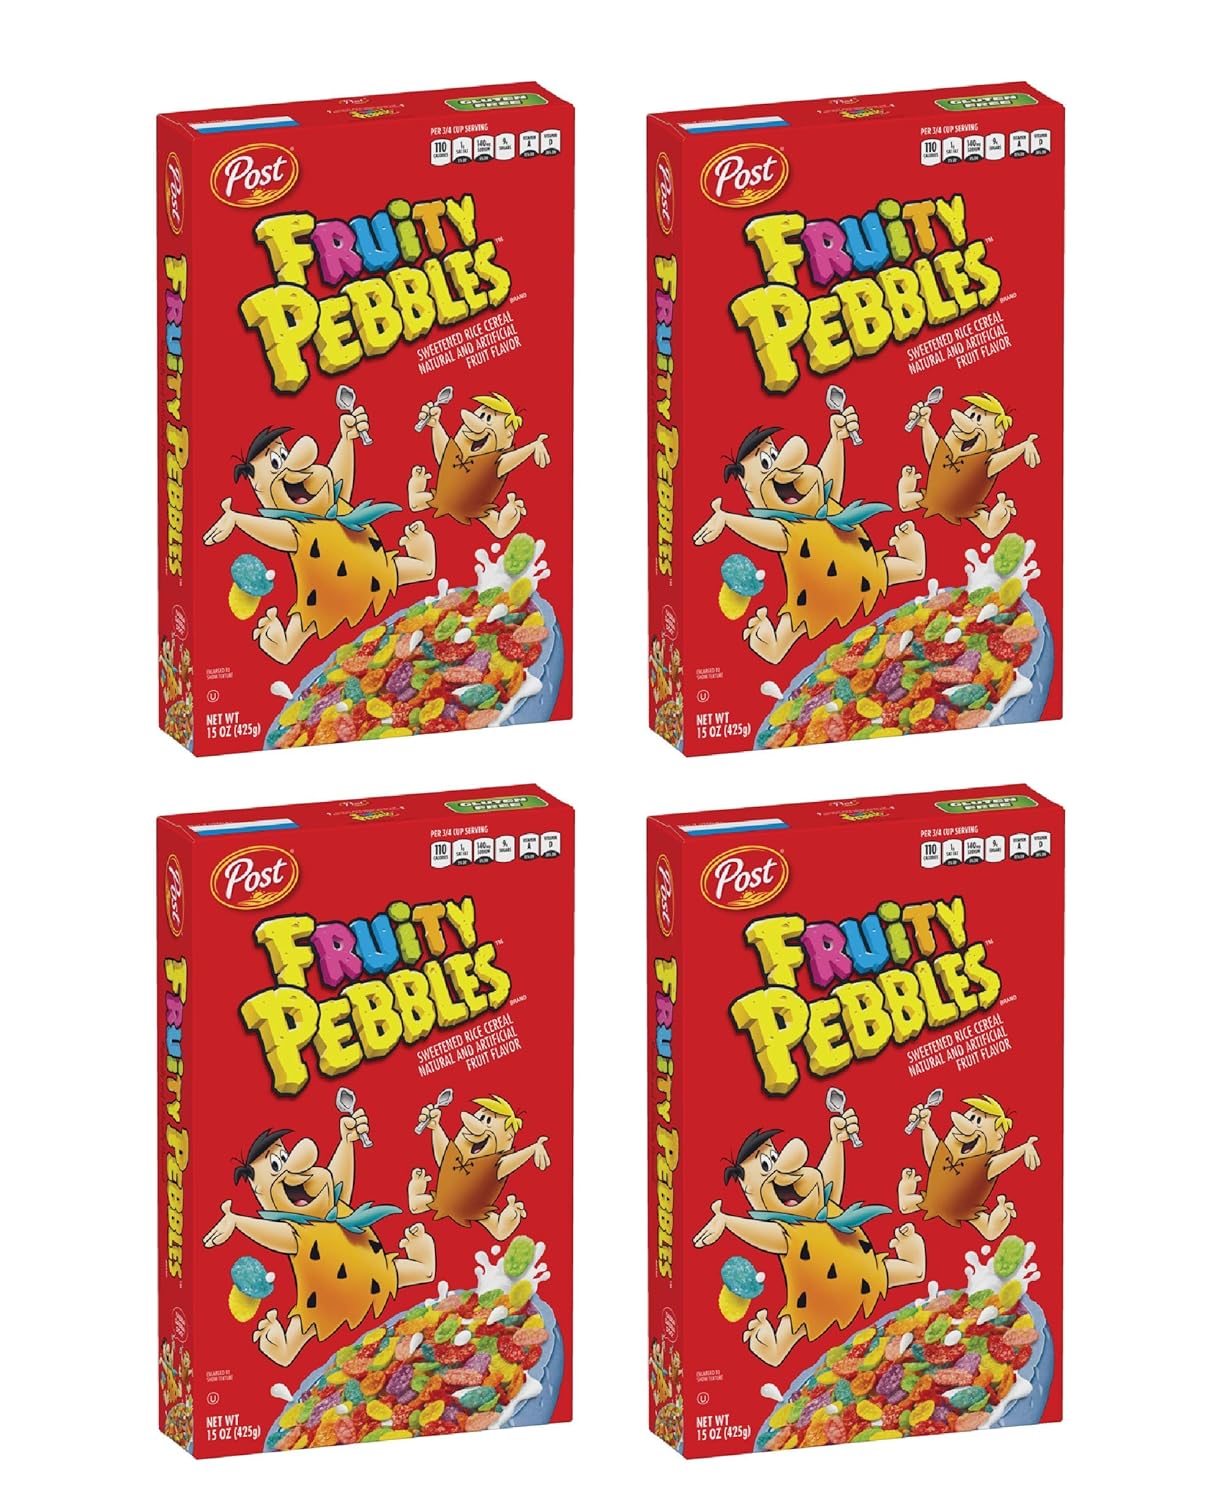 Post Fruity Pebbles Cereal with Vitamins & Minerals, Gluten-Free, Kosher Pareve, 11 Ounce (Pack of 4)